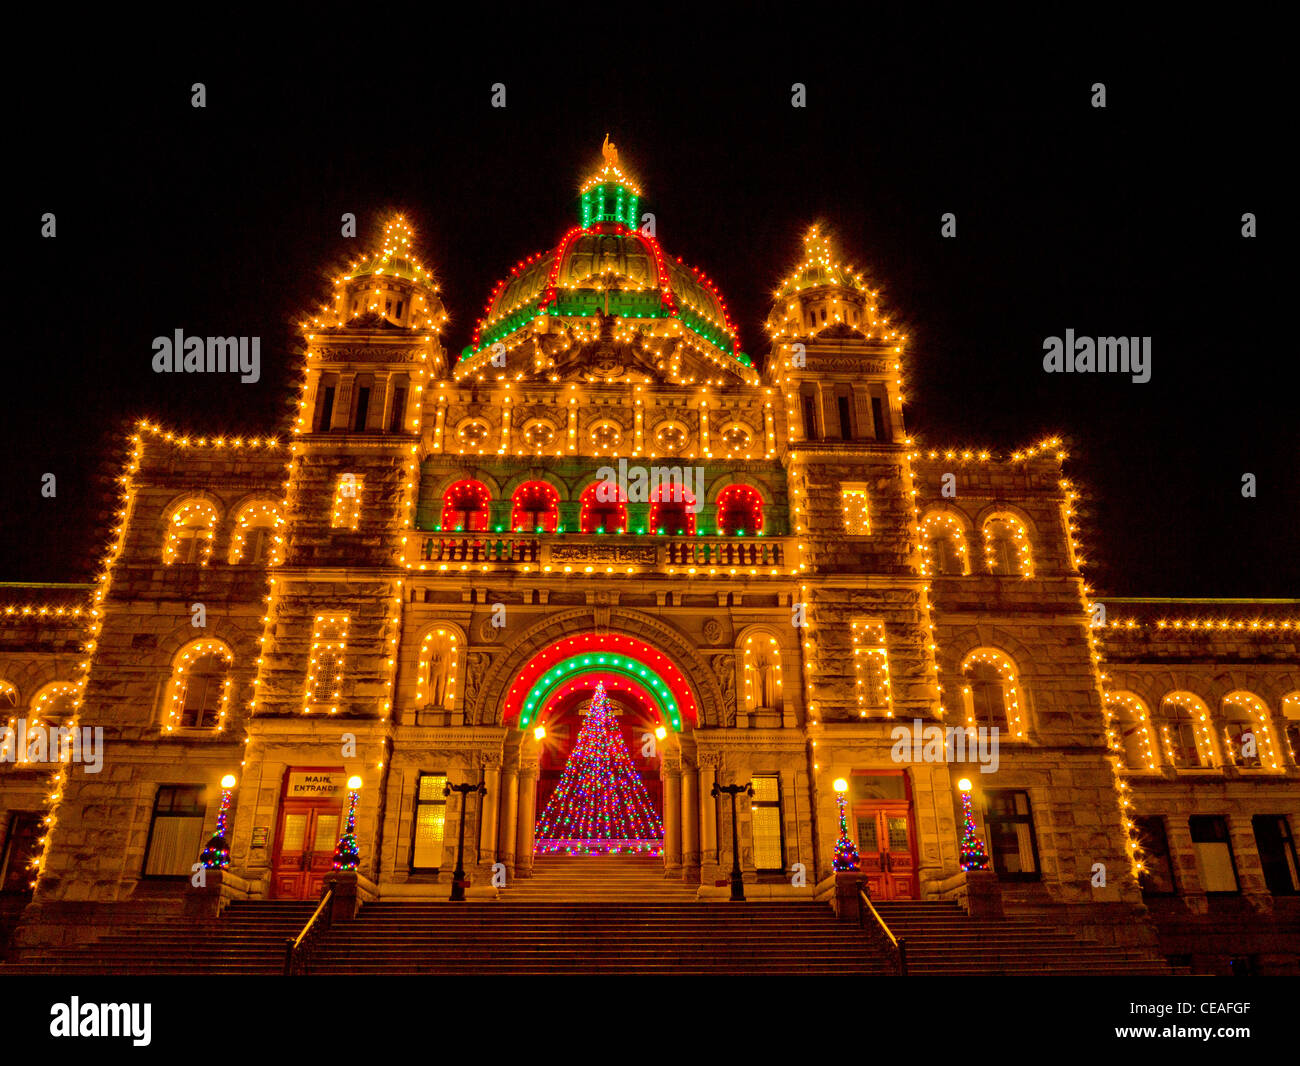 Parliament Building Victoria  B C  Christmas  lights and 